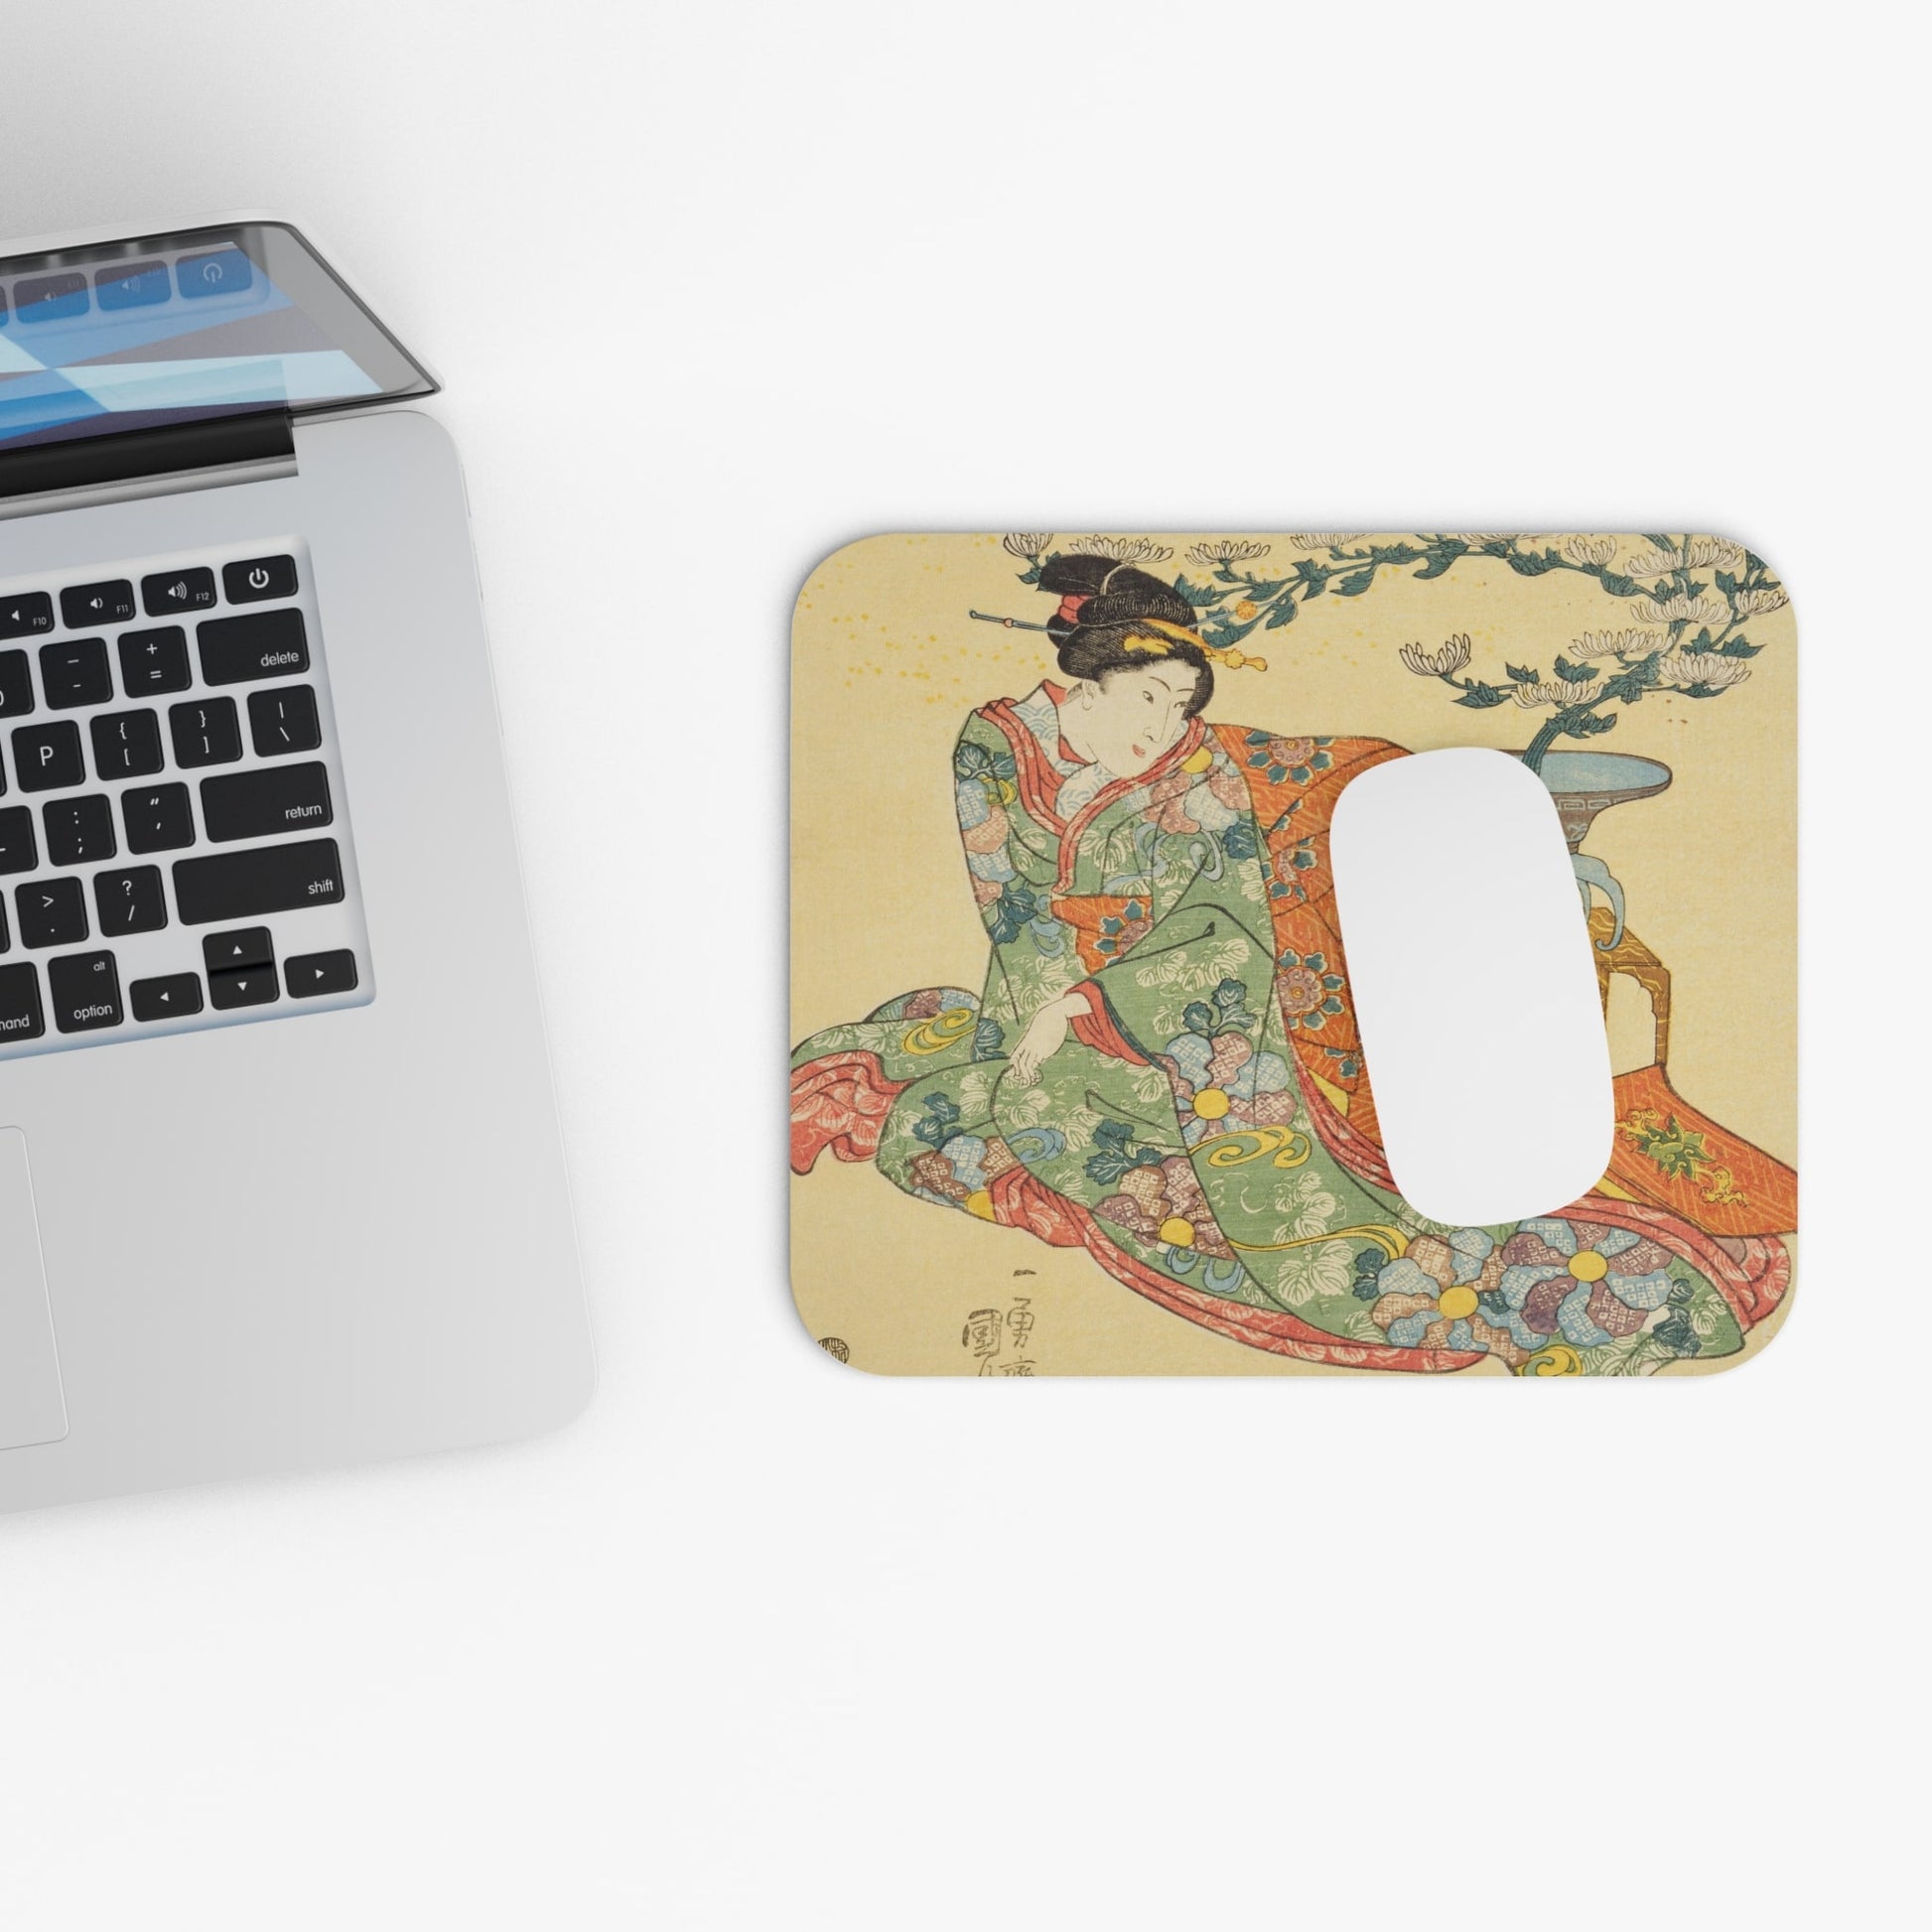 Vintage Japanese Aesthetic Design Laptop Mouse Pad with White Mouse